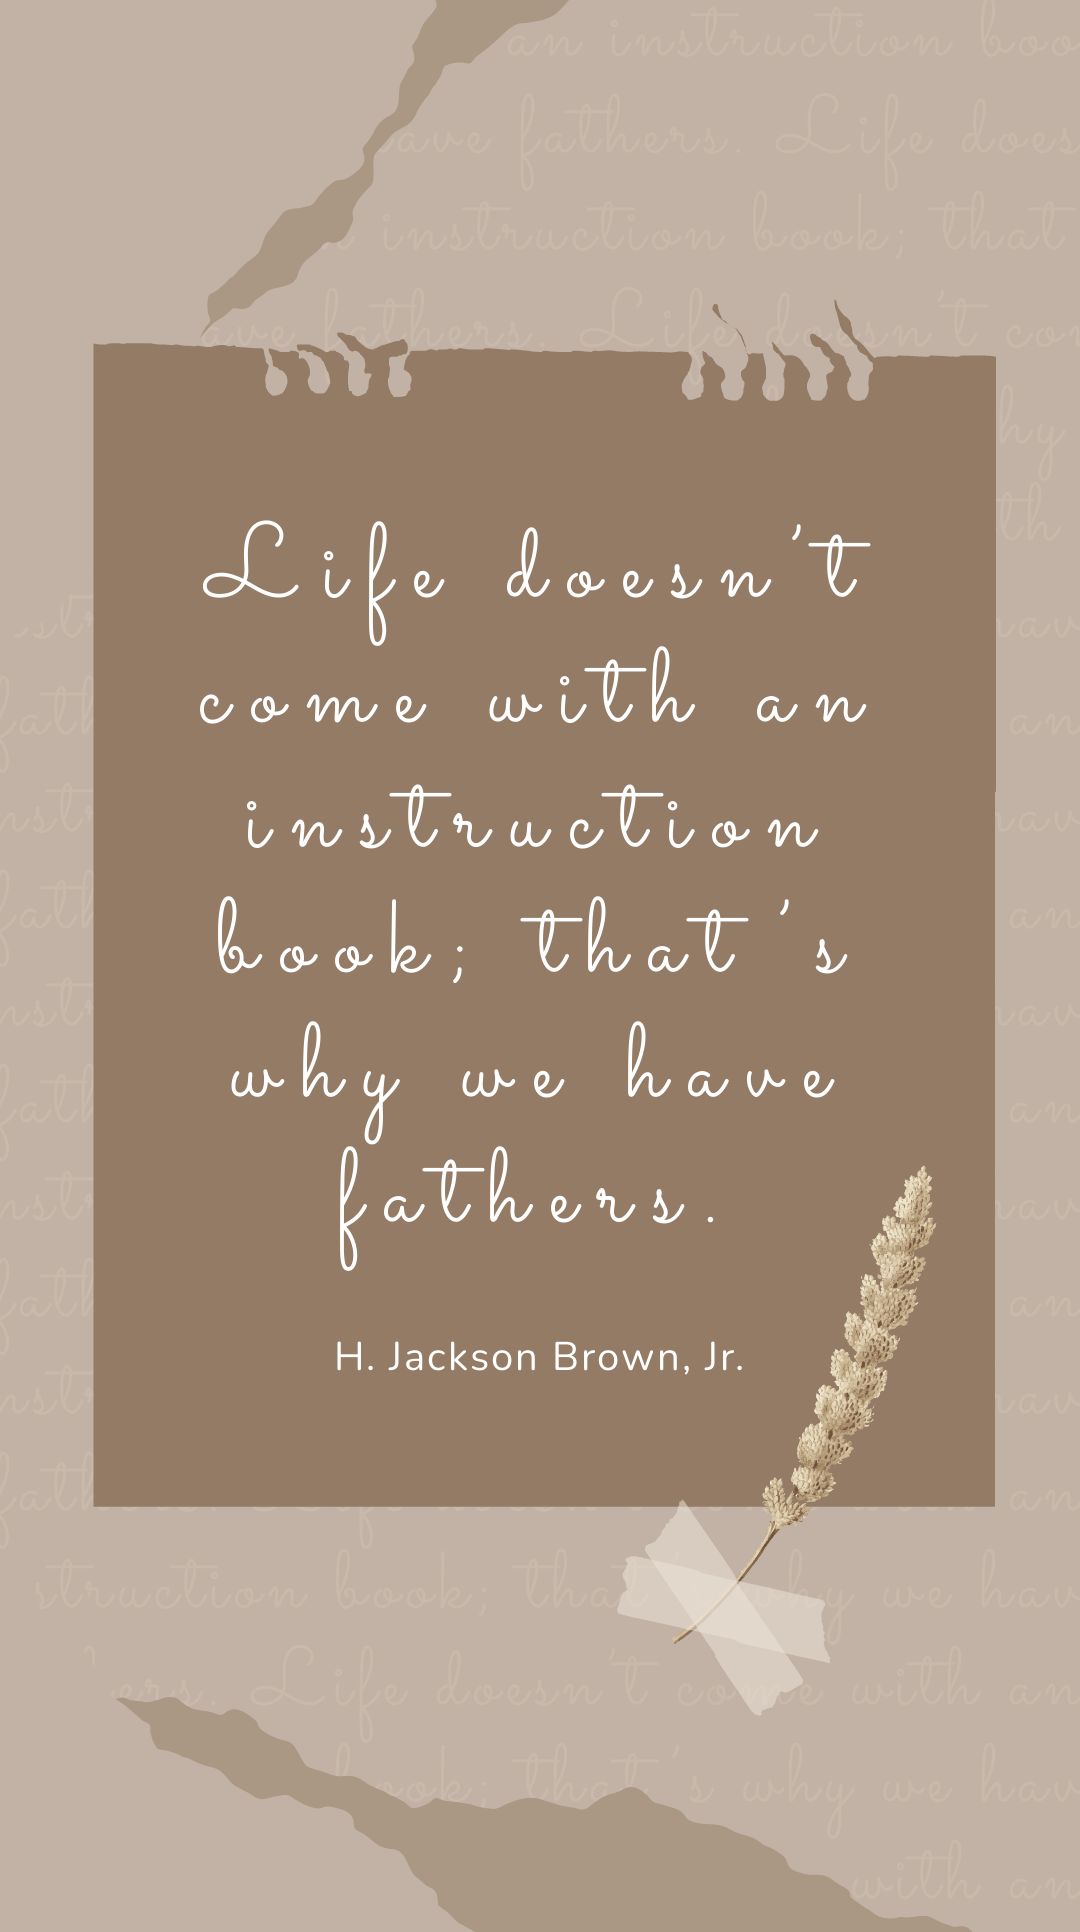 Free H. Jackson Brown, Jr. - Life doesn’t come with an instruction book; that’s why we have fathers. in JPG